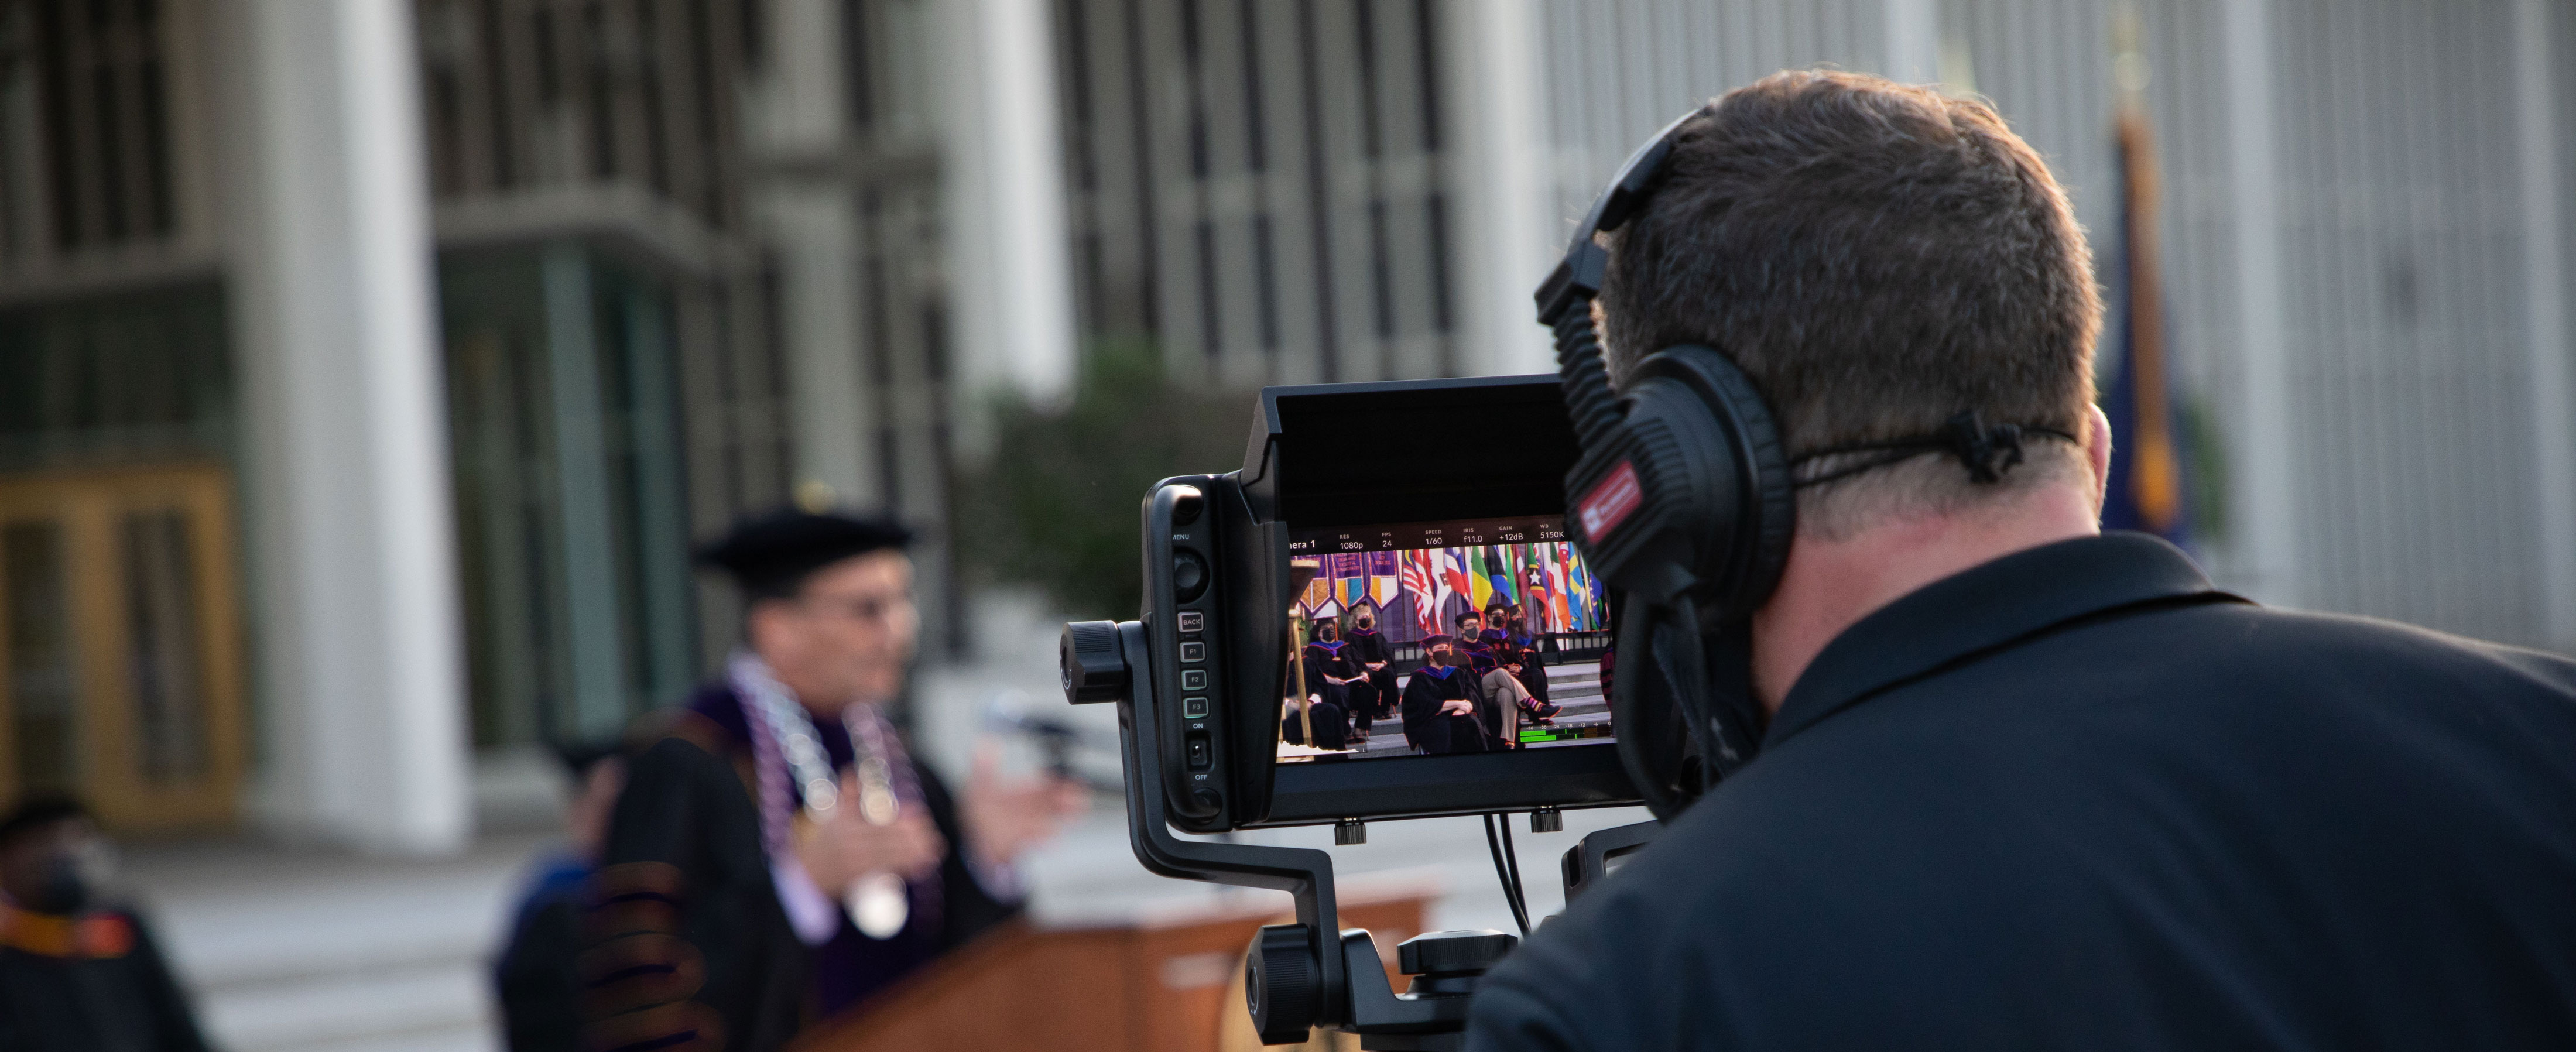 A camera operator wearing headphones looks into a camera display screen as he records Commencement